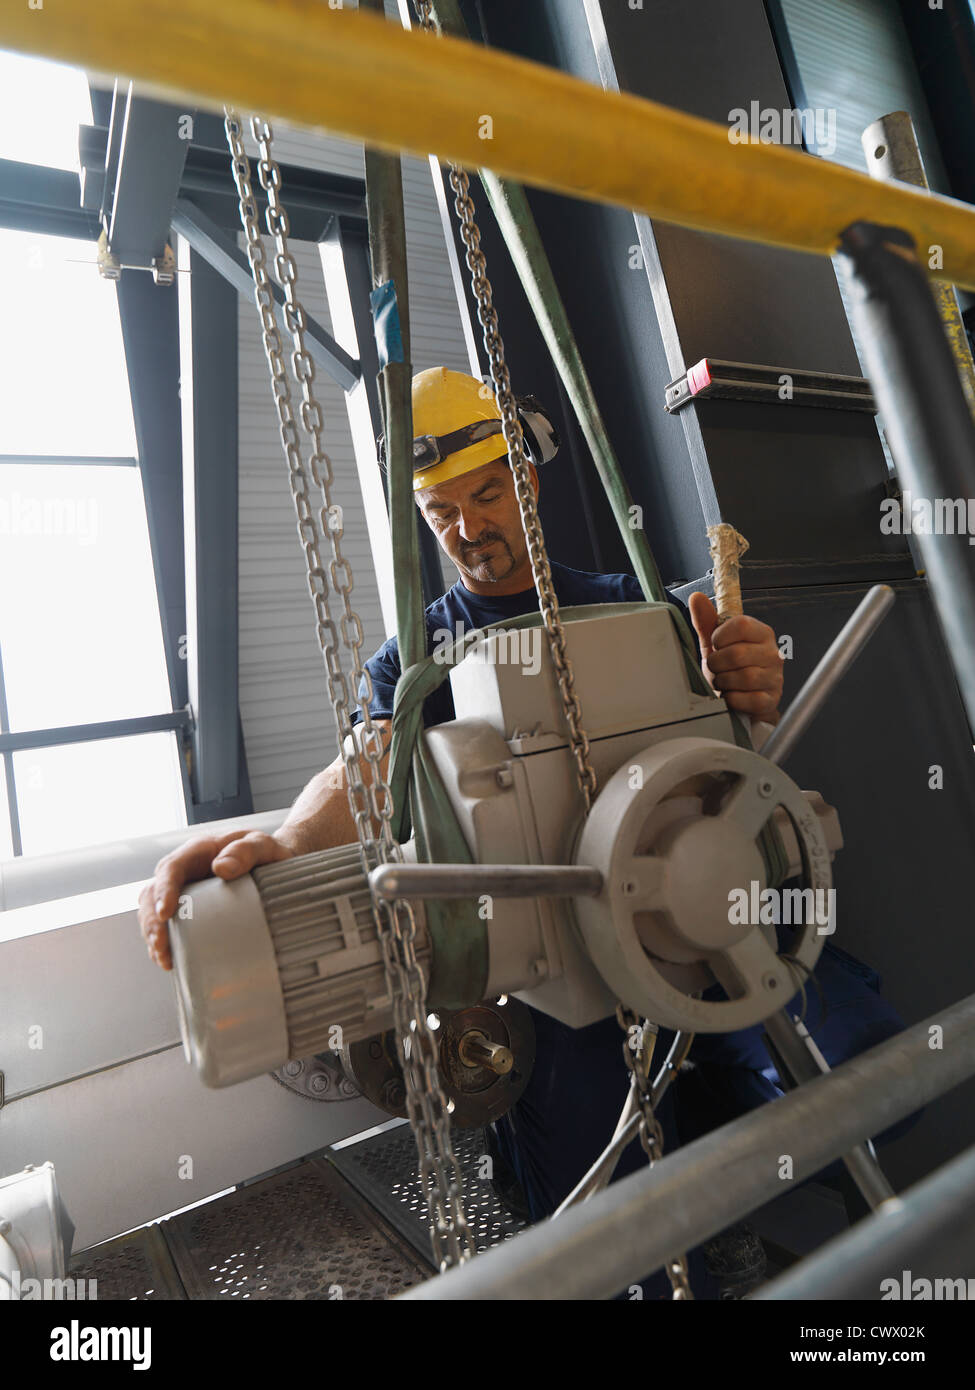 Worker operating machinery in factory Stock Photo